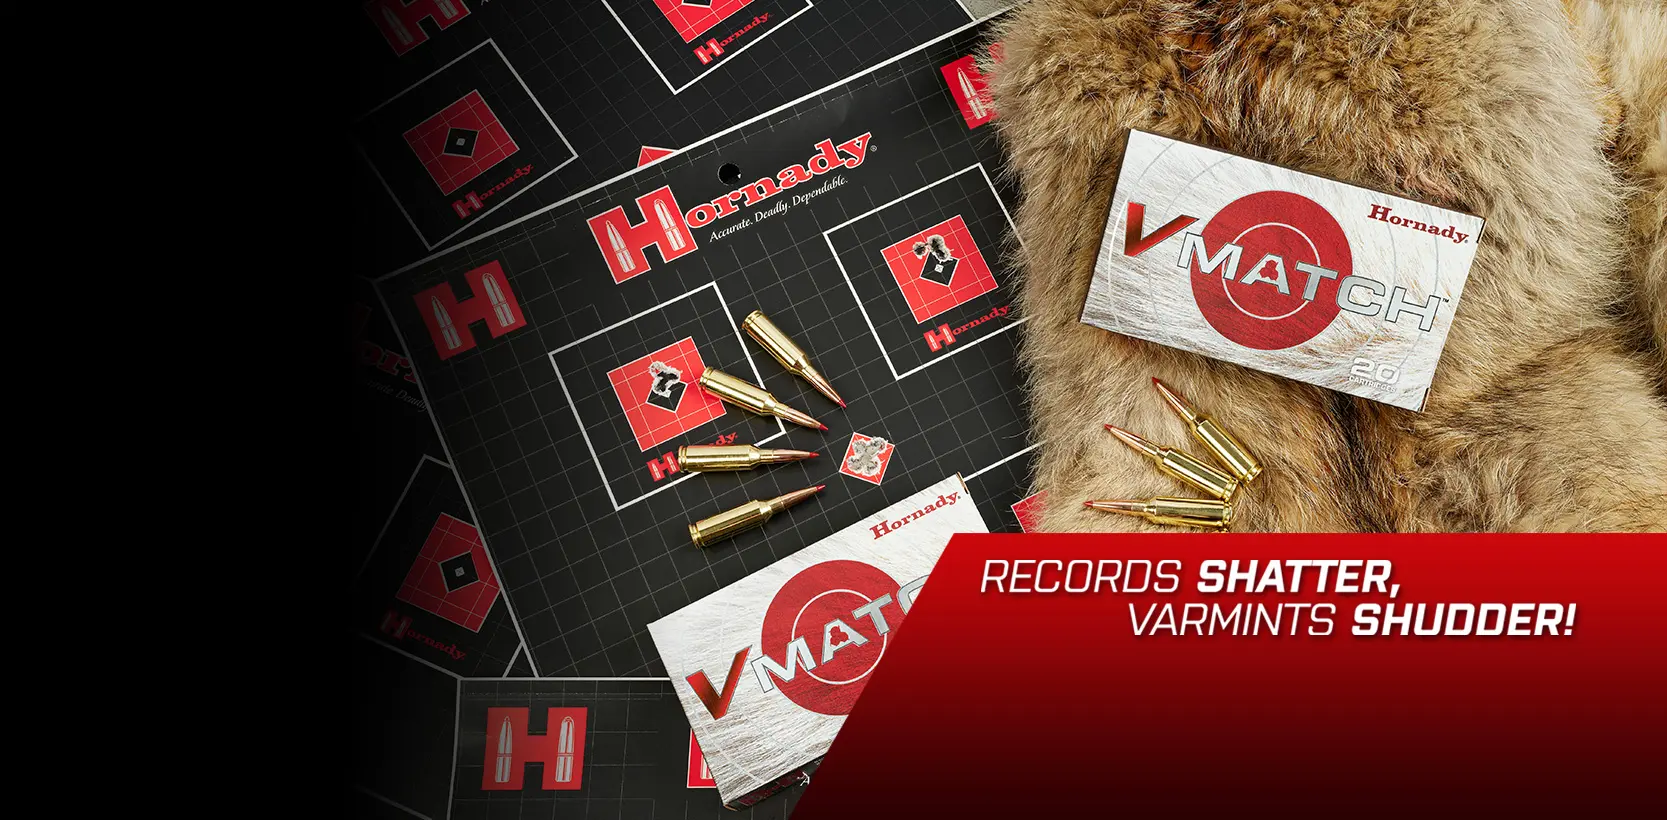 Slide number 3 INNOVATIONPRECISION & PERFORMANCE
Elevate your varmint shooting experience, shatter records, and make your mark like never before with V-Match™ ammunition.Find Out More